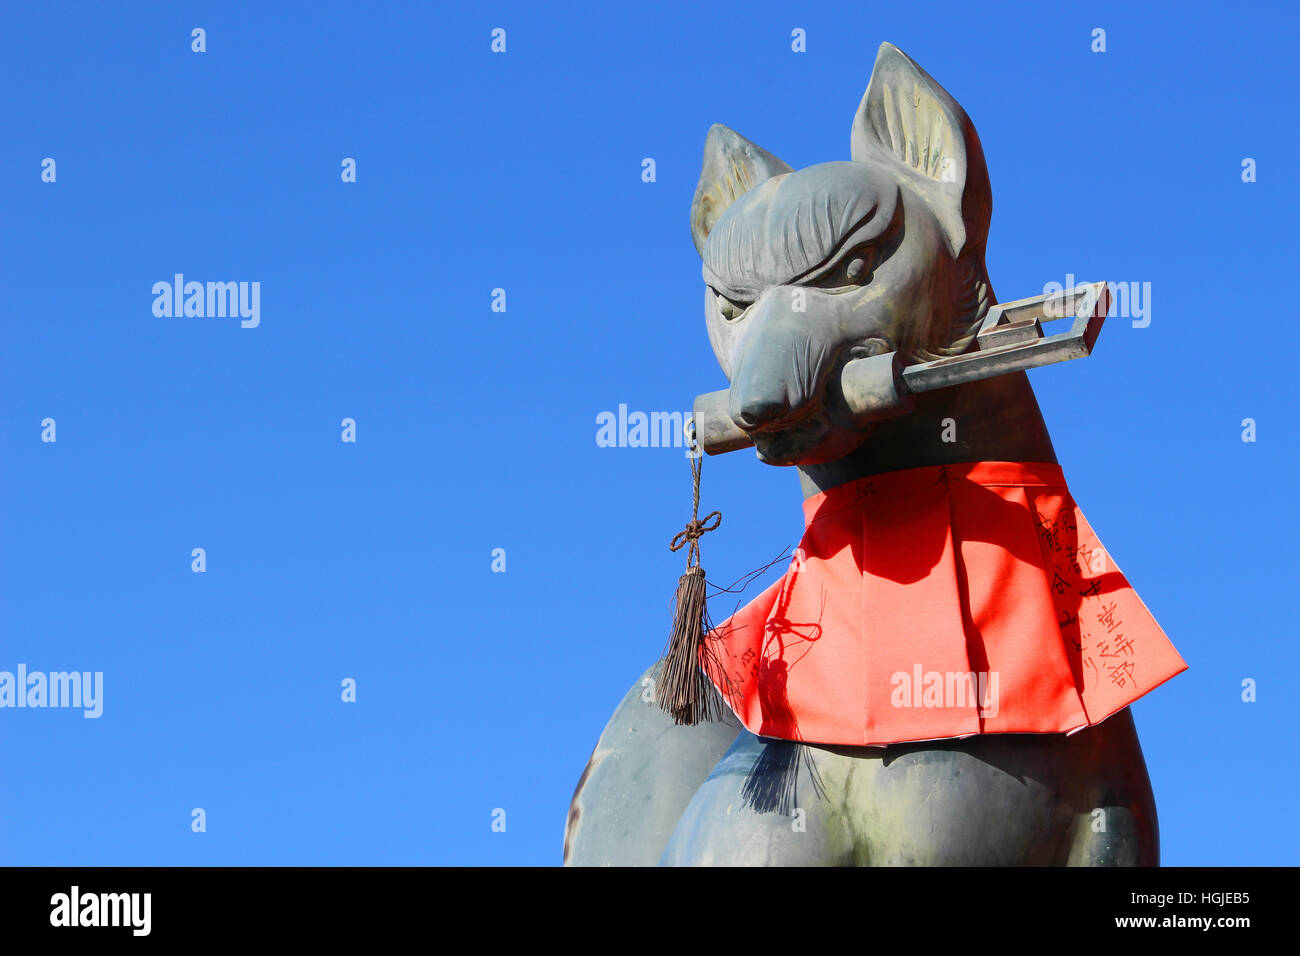 Fox statue at the entrance of Fushimi Inari Shrine in Kyoto, holding a key in its mouth Stock Photo